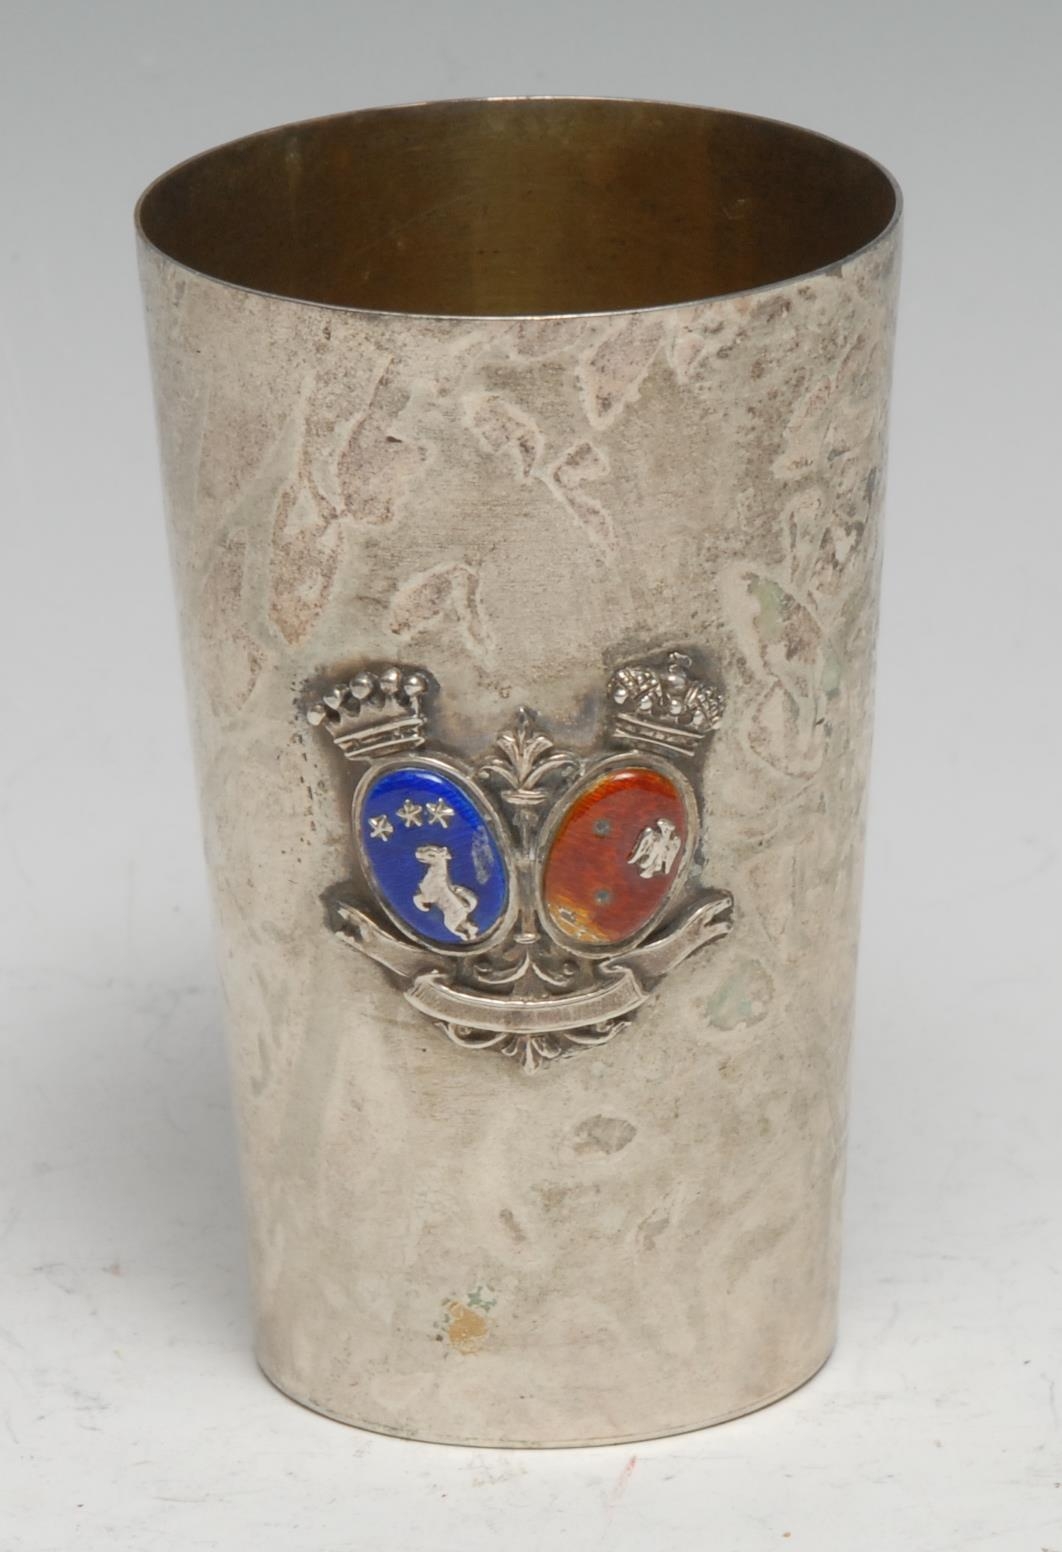 A Continental silver and enamel tapered cylindrical marriage cup, applied with coats of arms, gilt